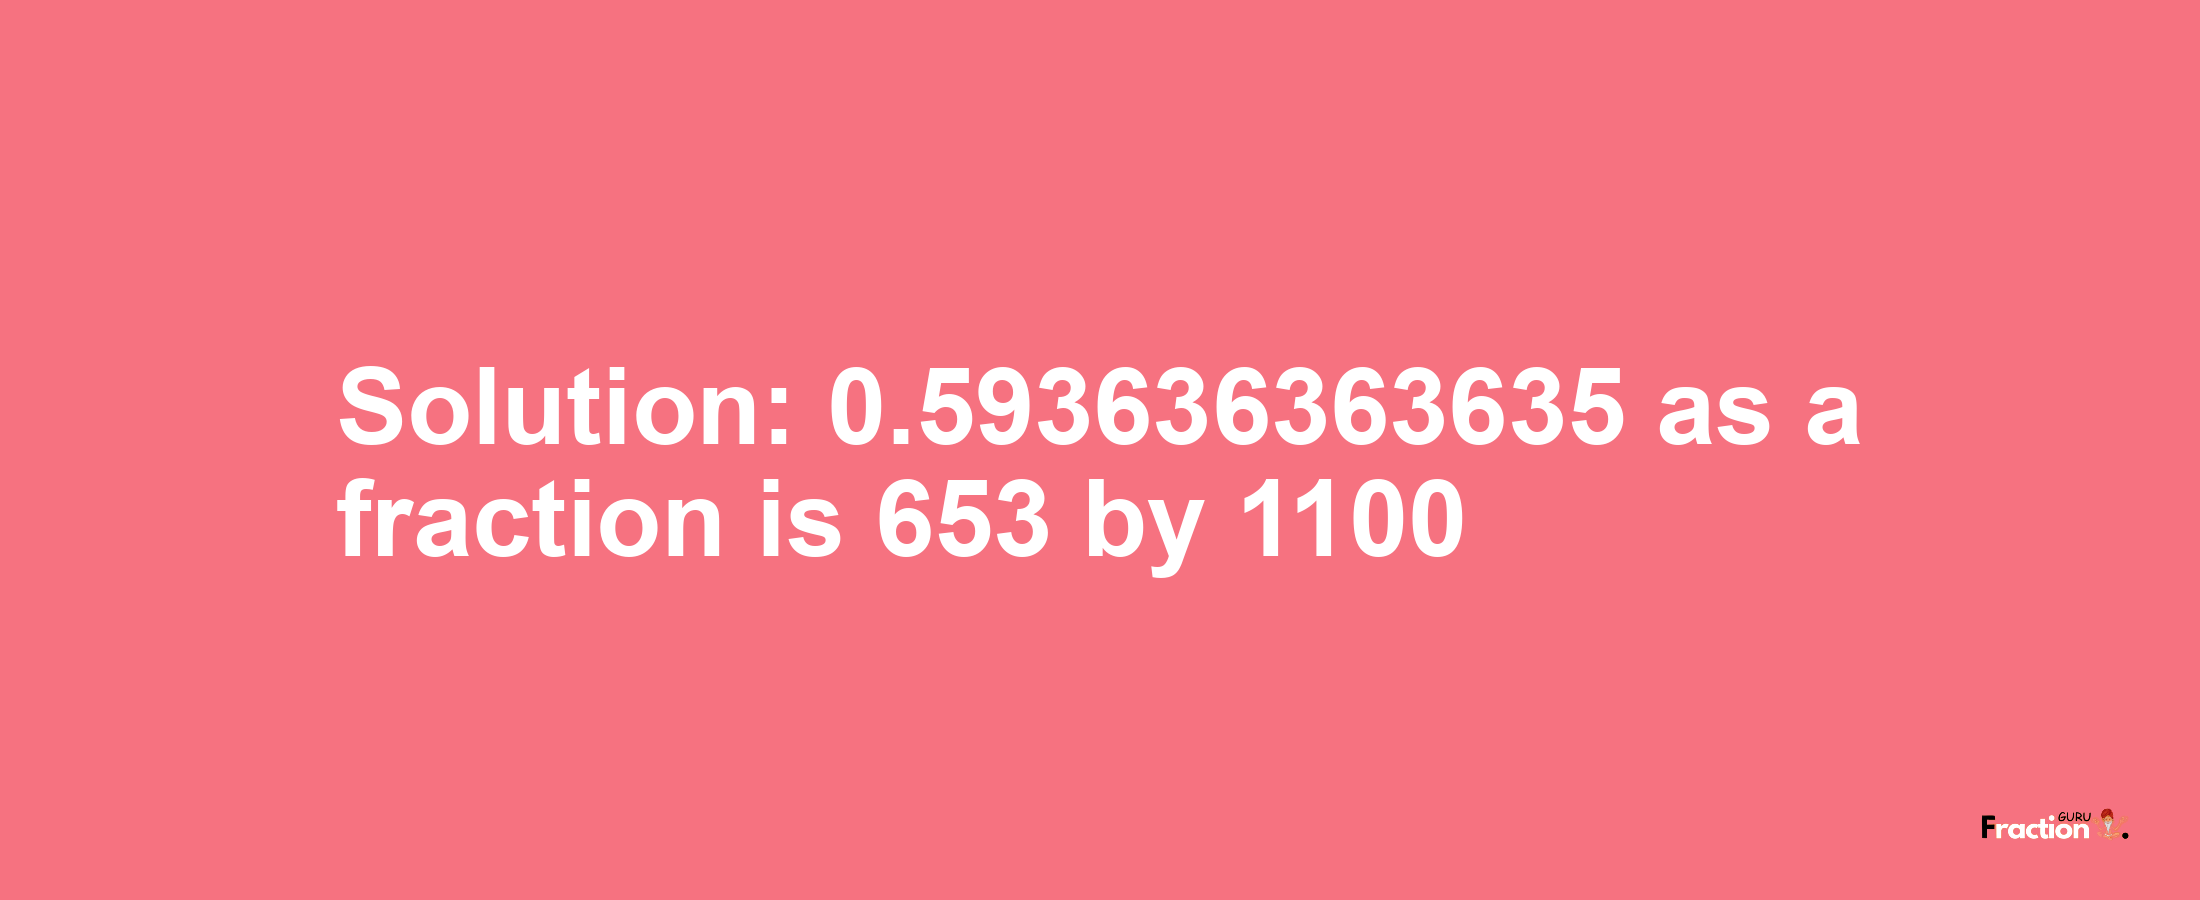 Solution:0.593636363635 as a fraction is 653/1100